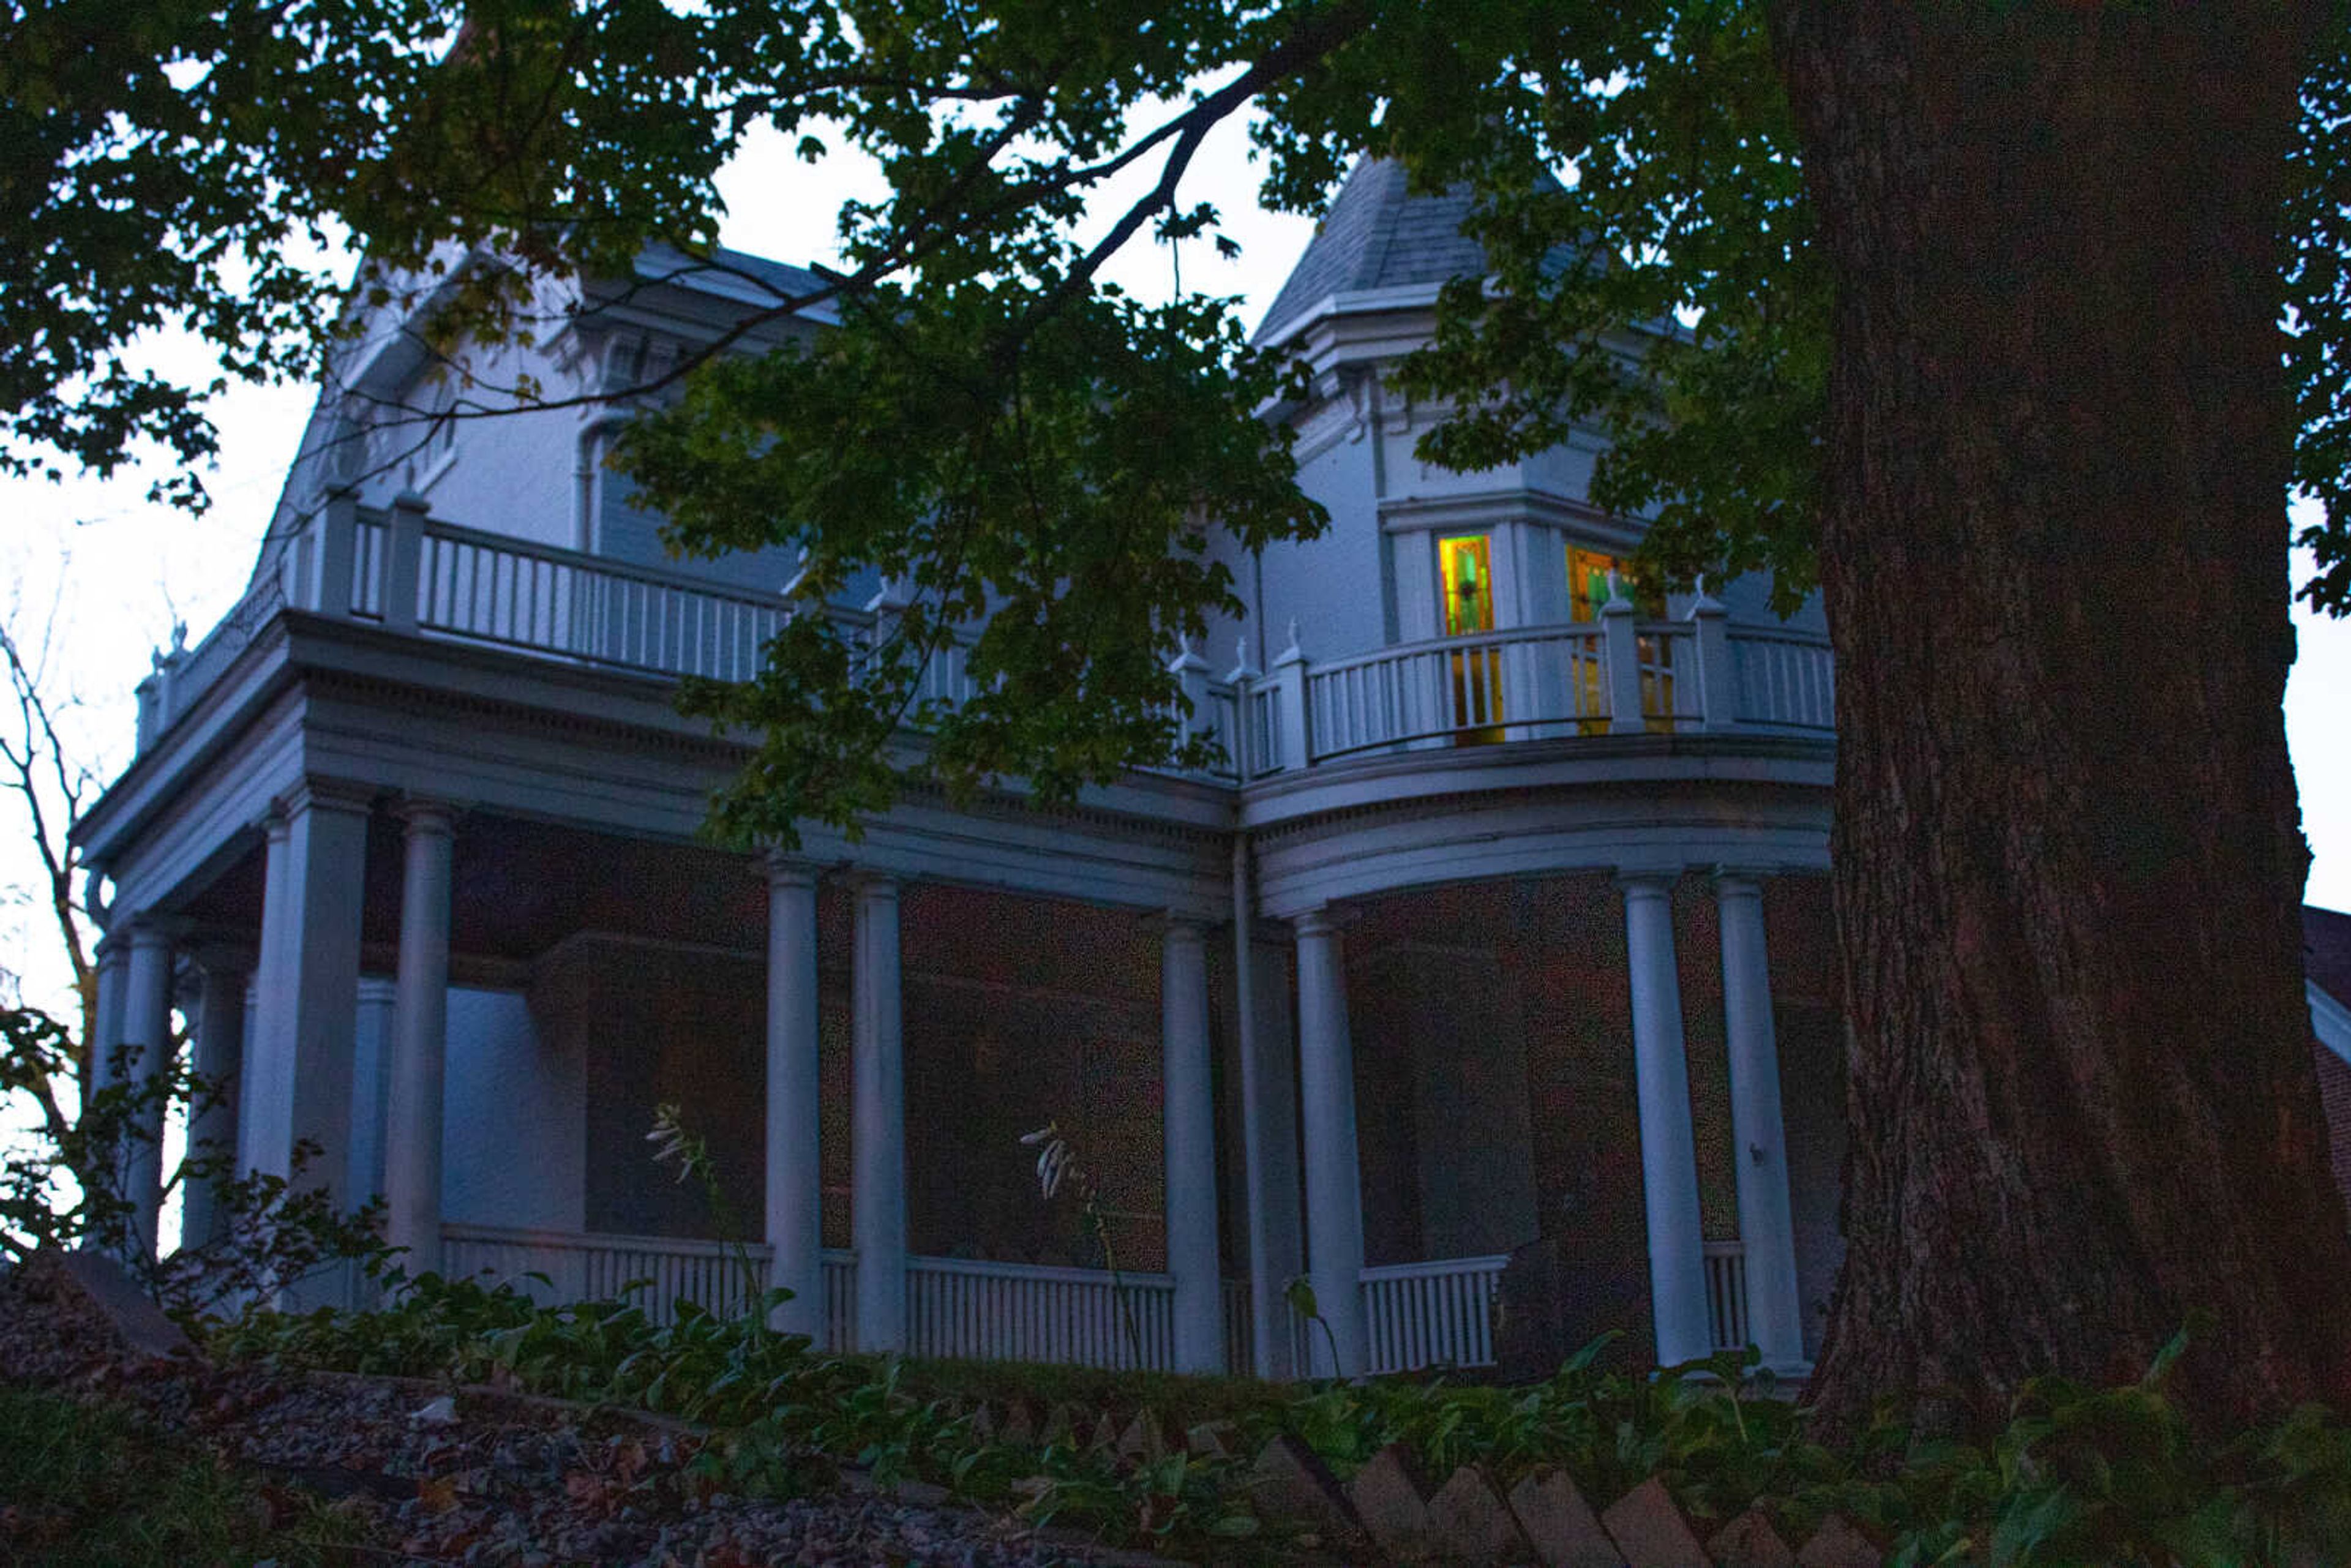 Living History and Ghostly Tales - The Glenn House is a historical treasure